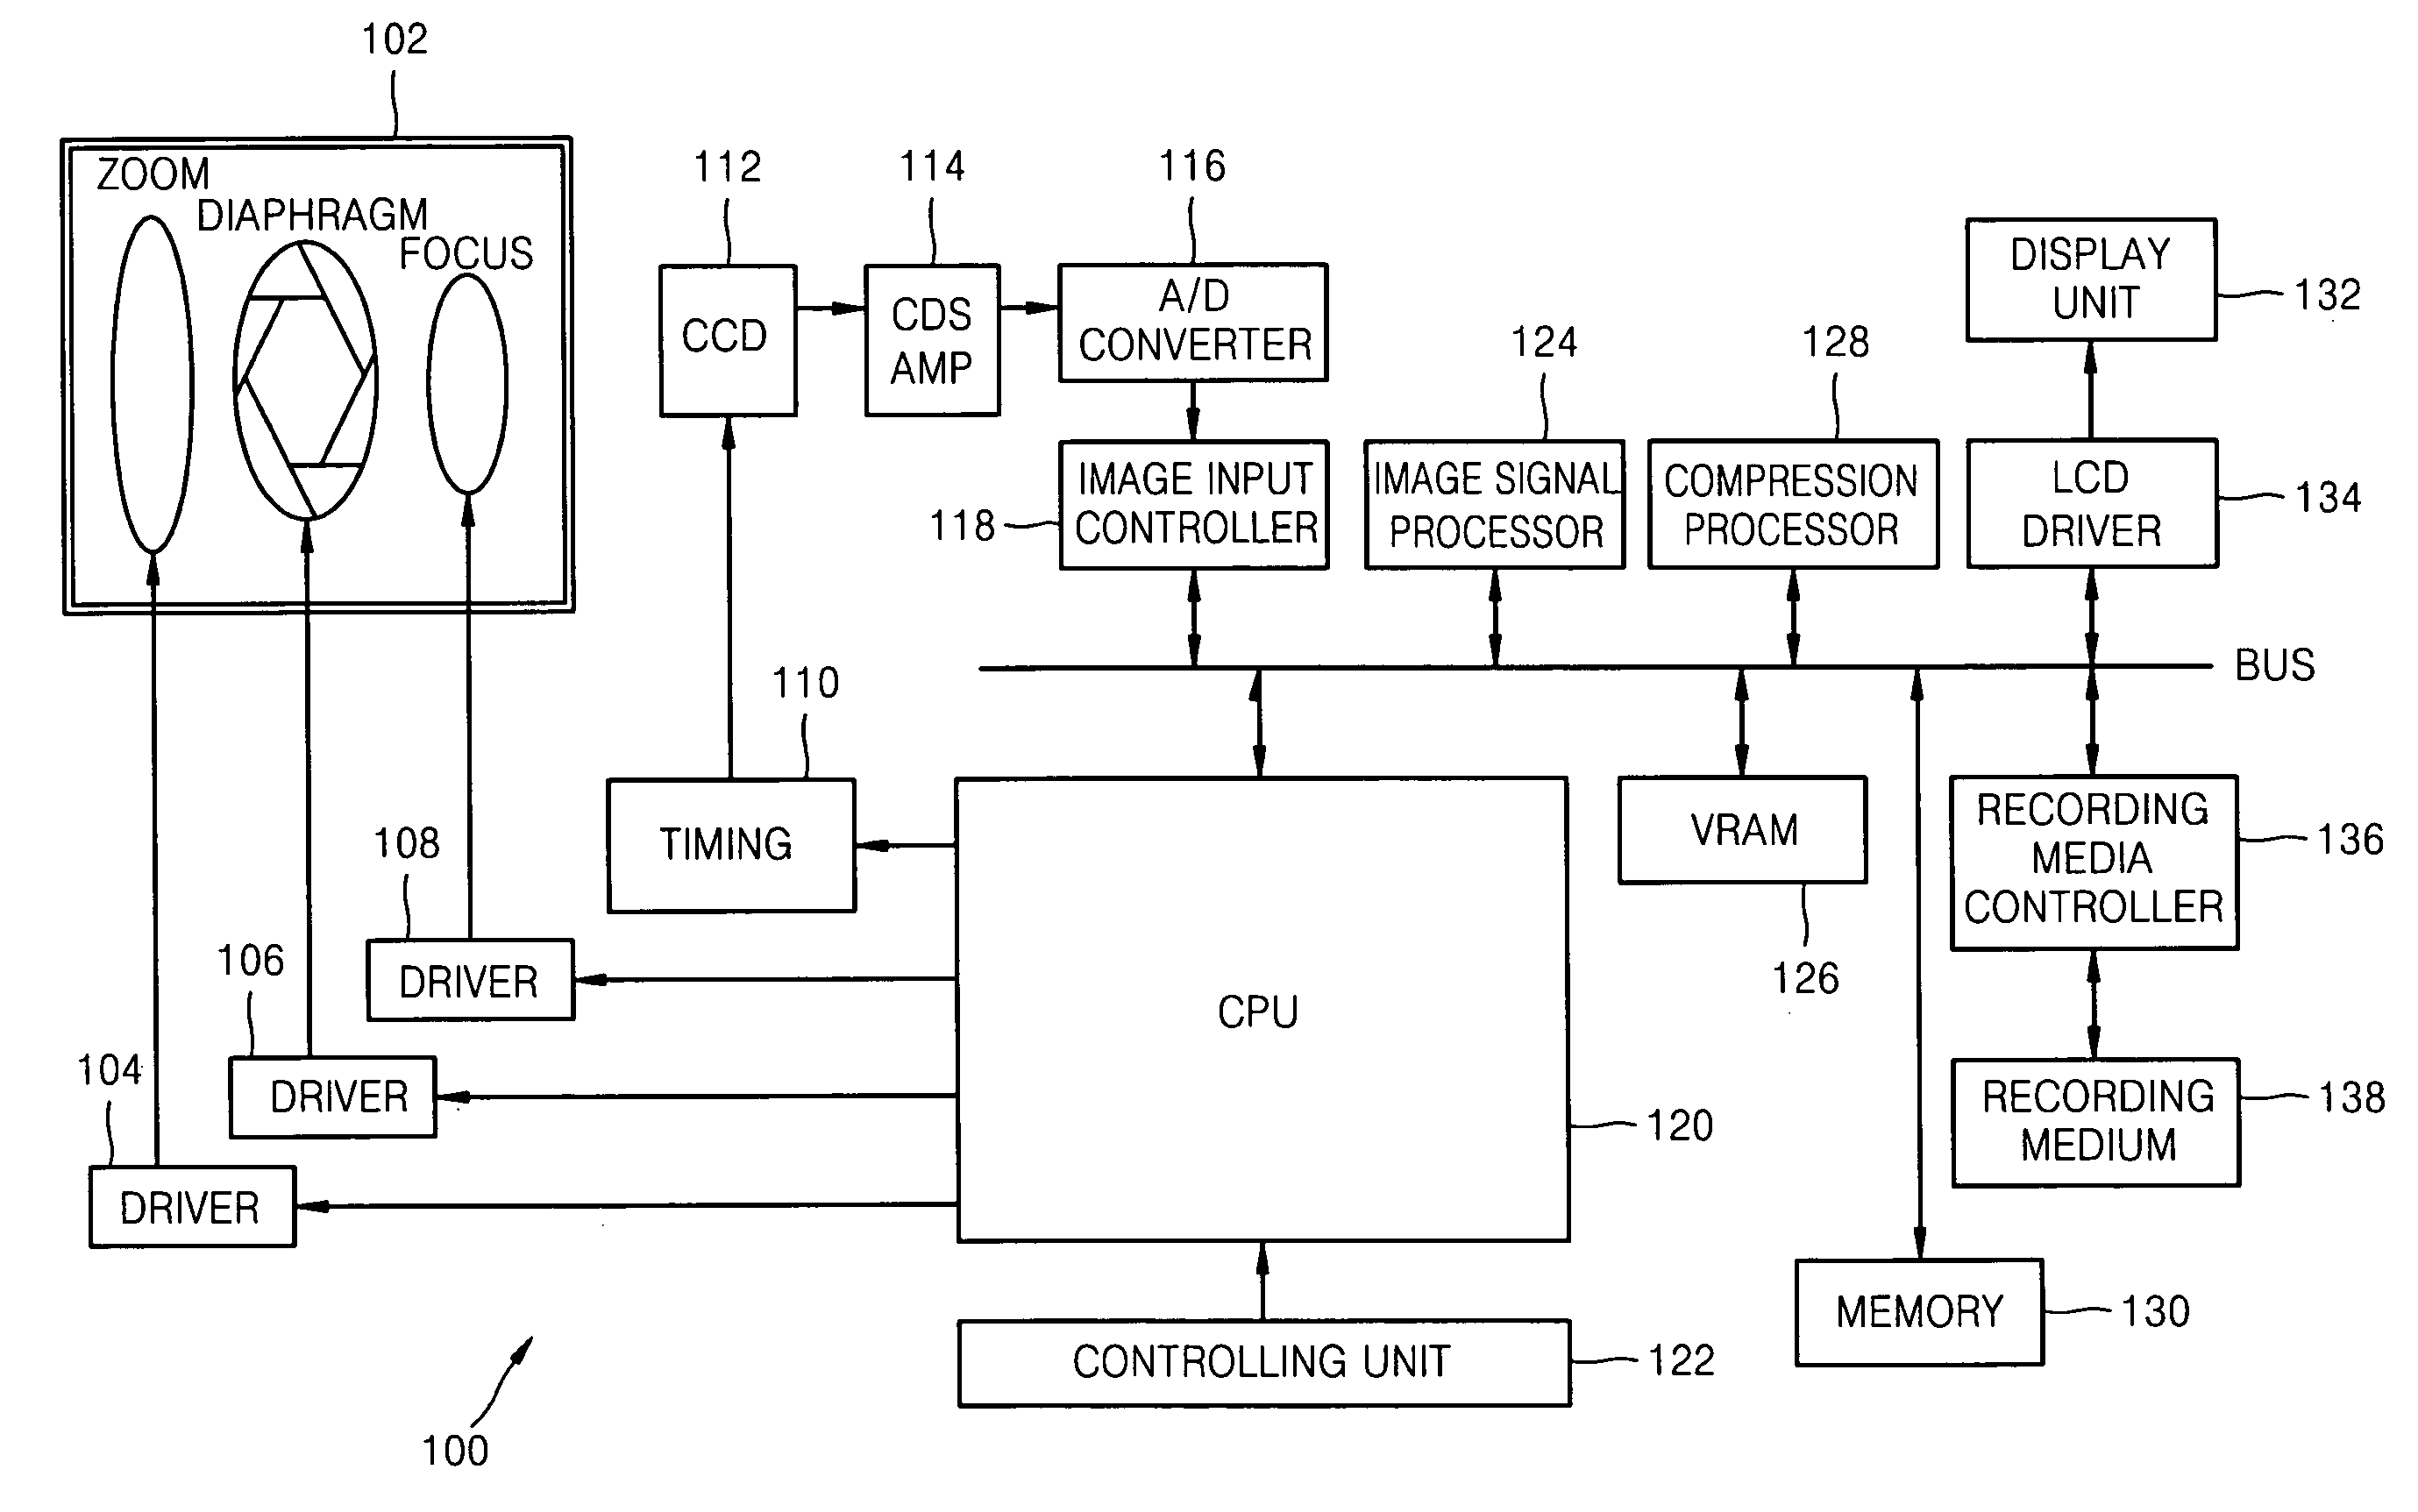 Apparatus and method for image pickup